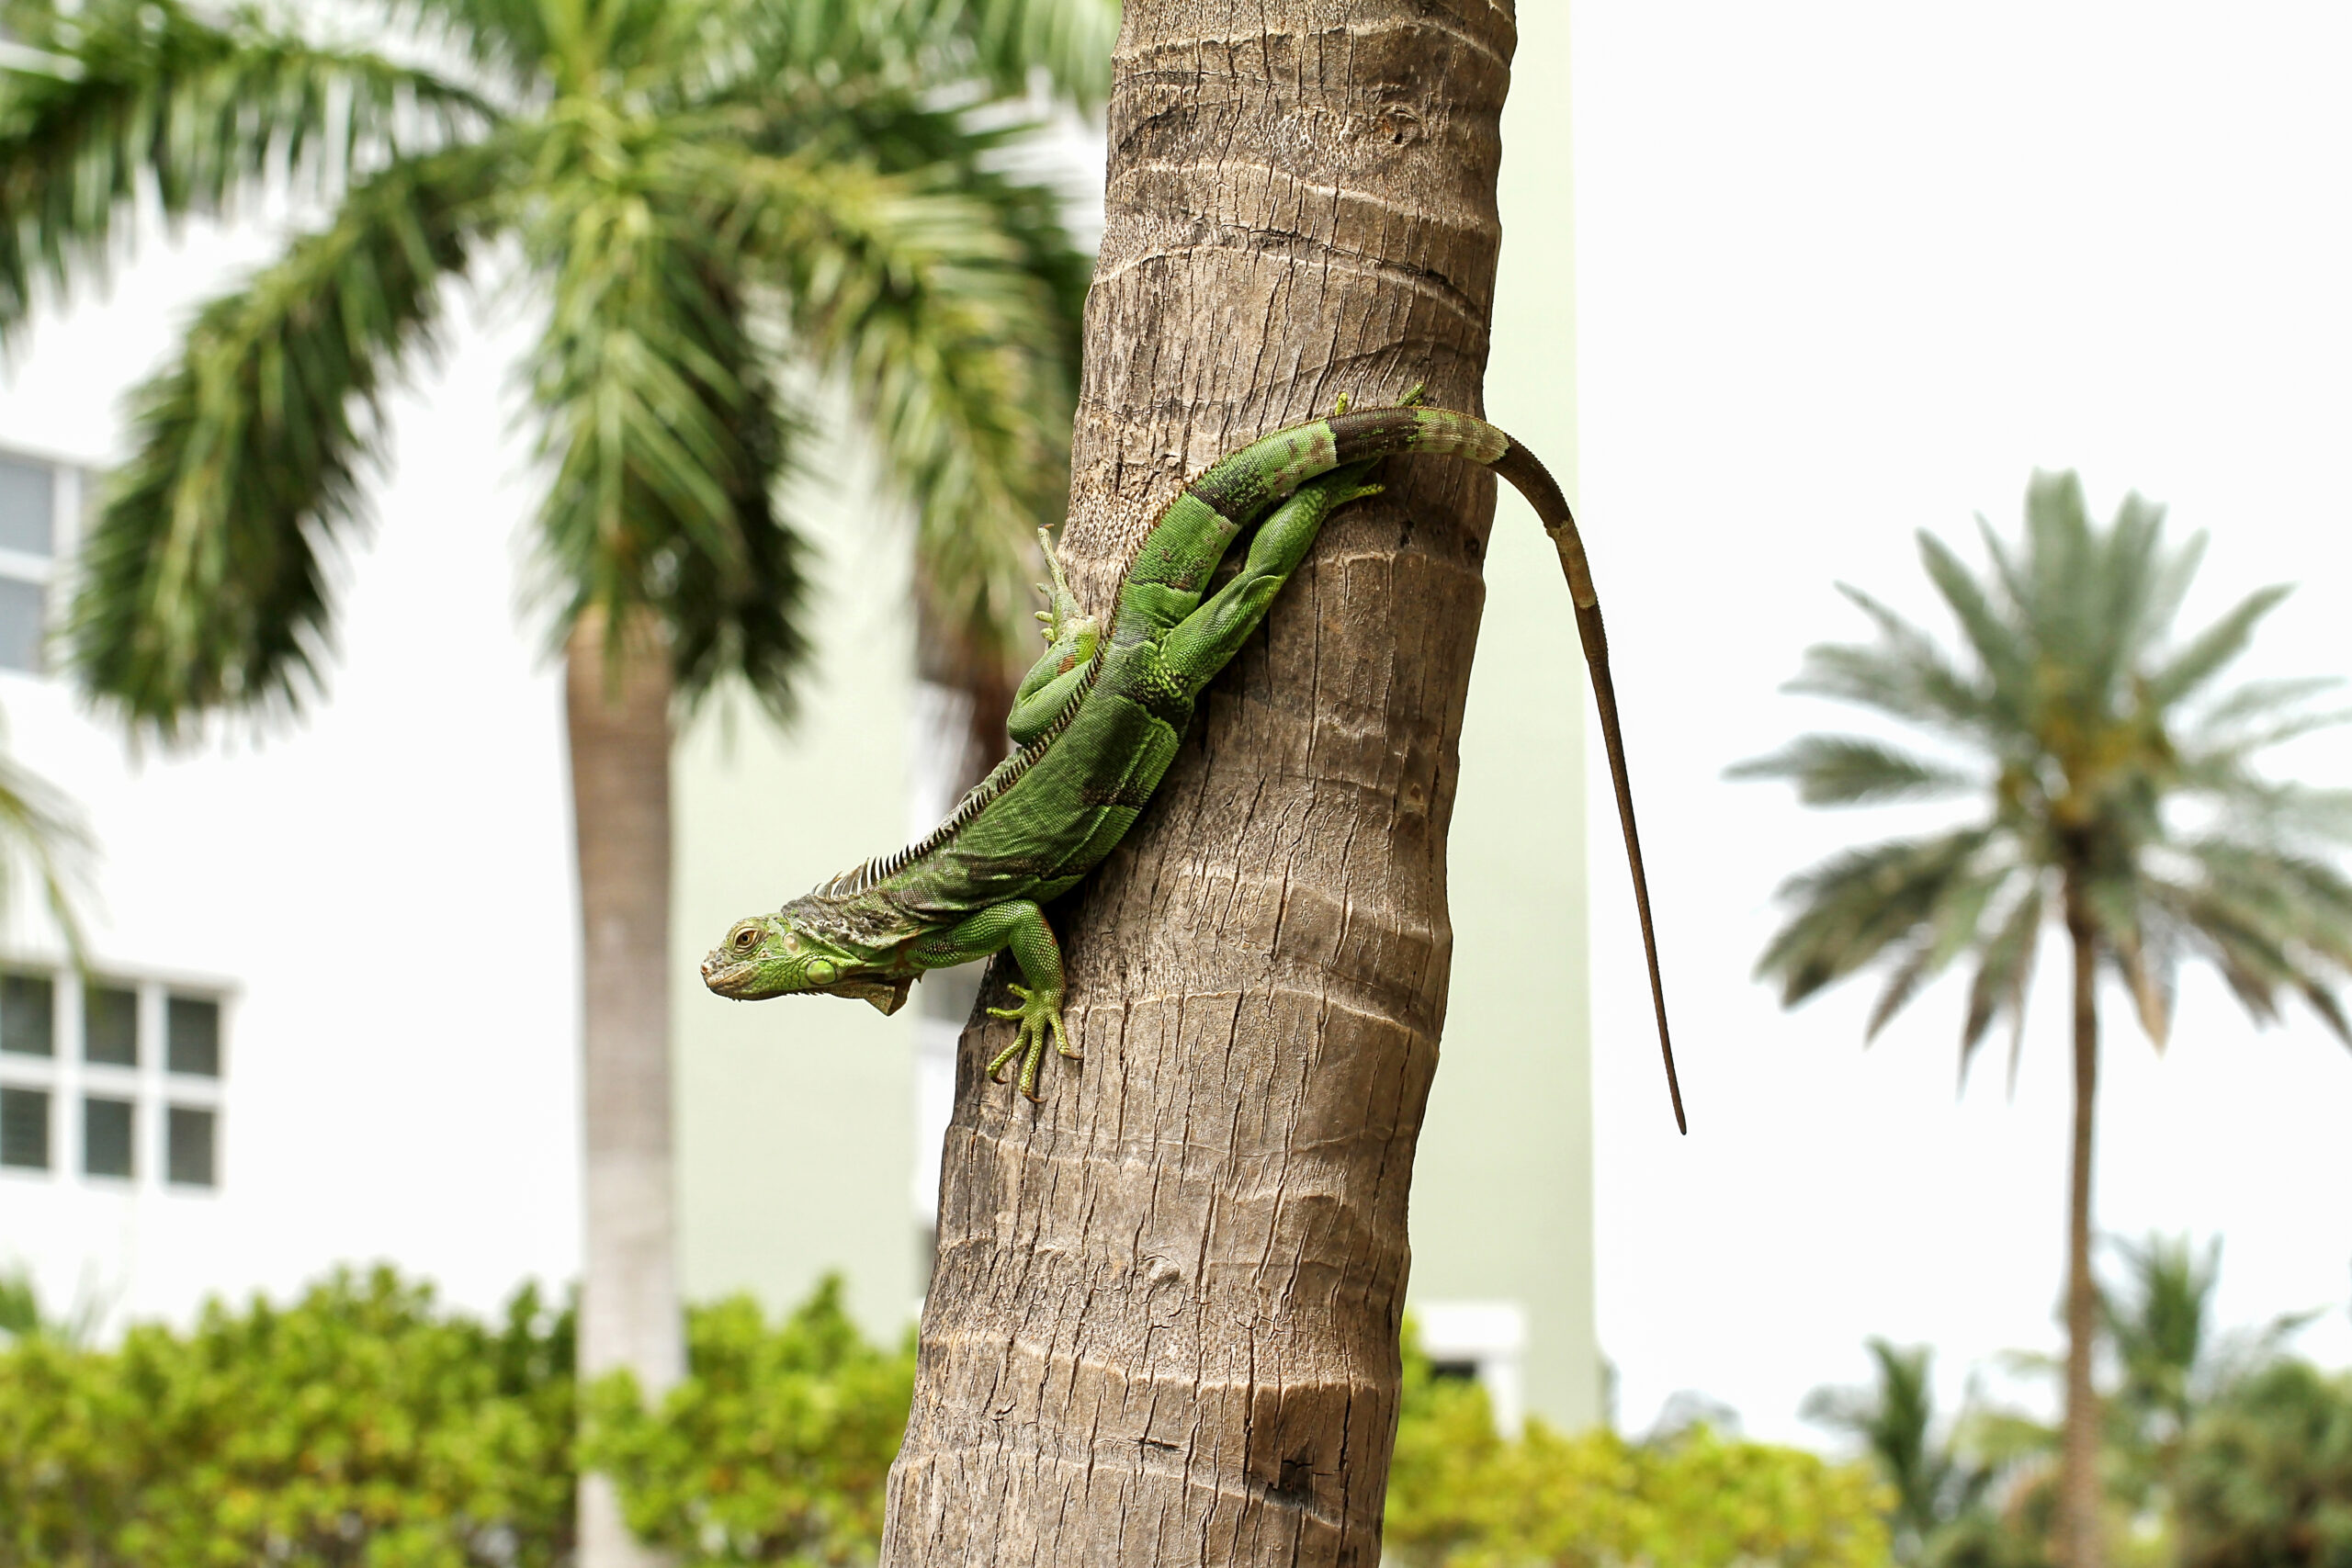 a green iguana clings to the trunk of a palm tree